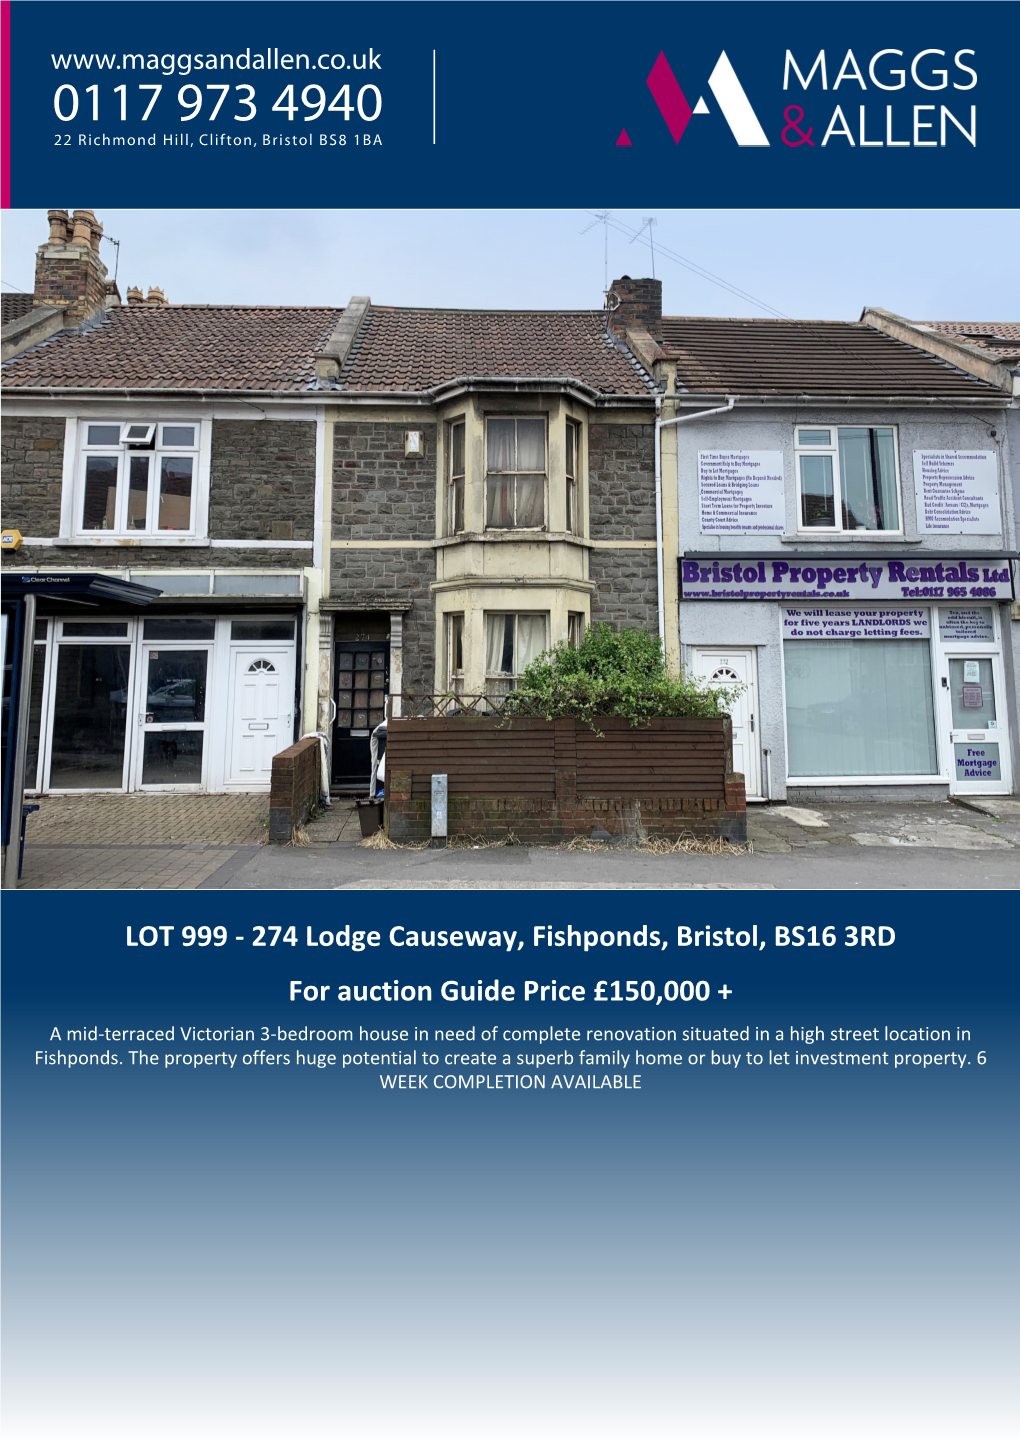 274 Lodge Causeway, Fishponds, Bristol, BS16 3RD for Auction